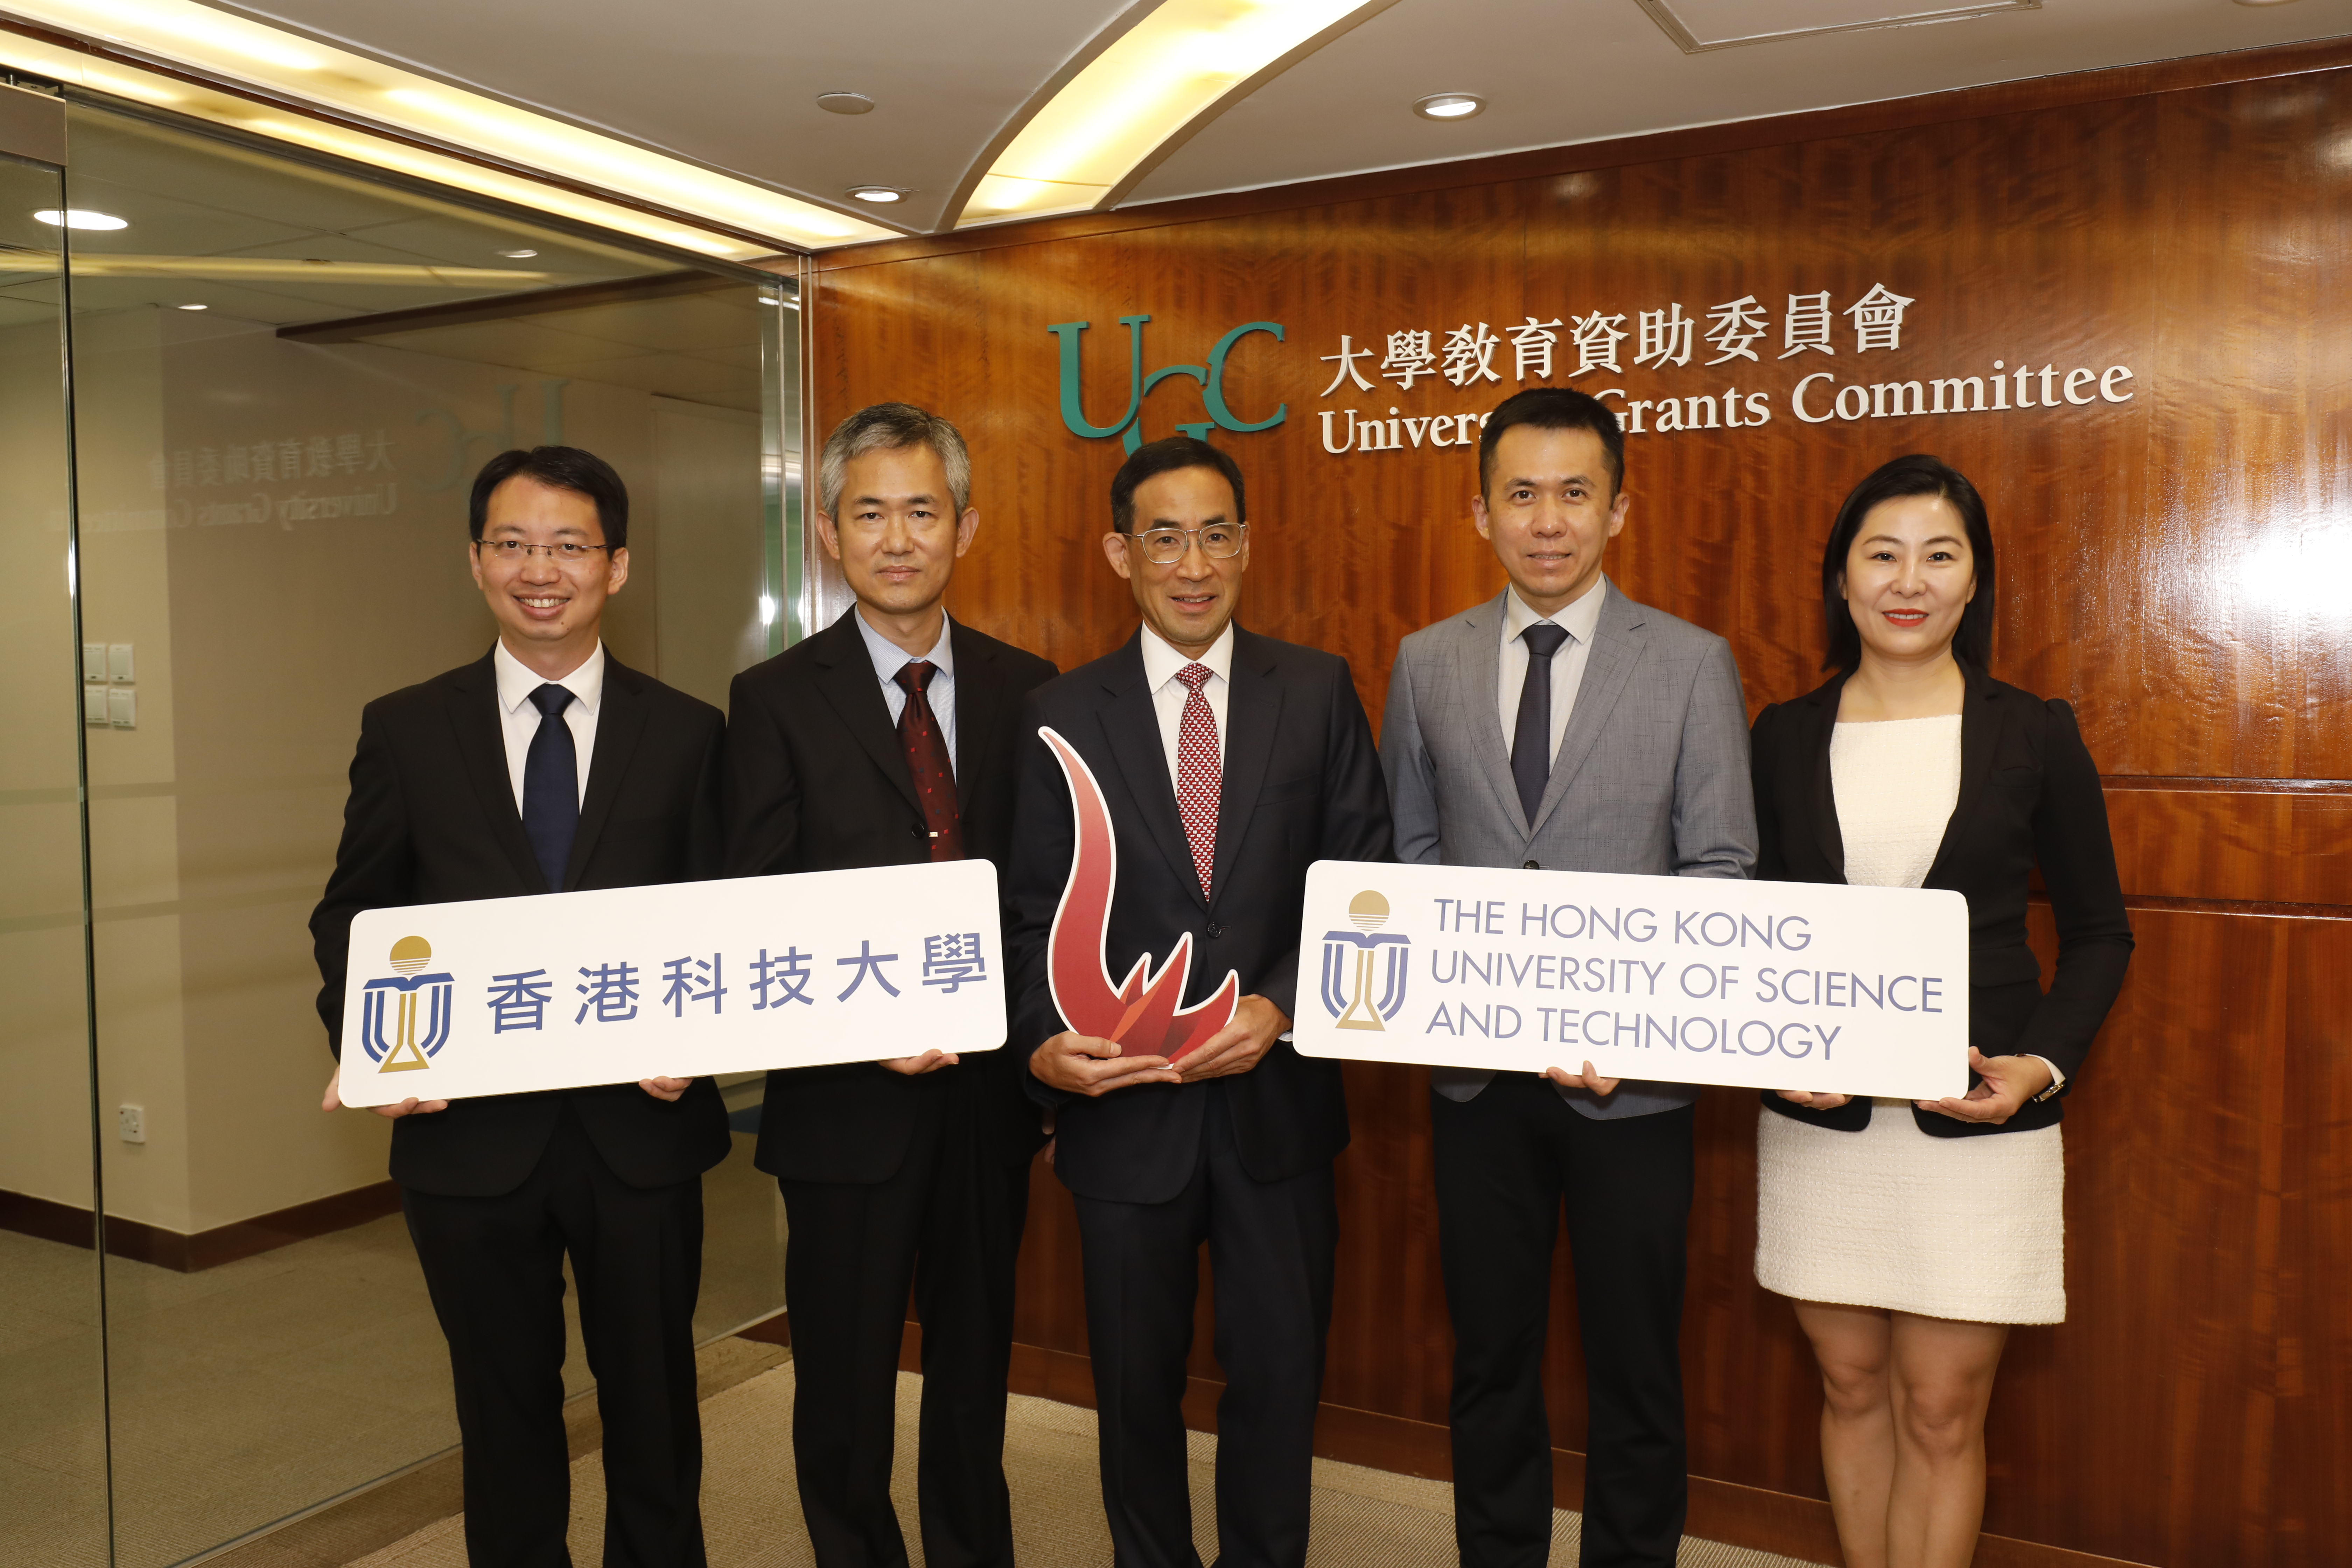 (From left) Prof. Jack CHENG, Associate Head and Professor of the Department of Civil and Environmental Engineering; Prof. ZHAO Jidong, Professor of the Department of Civil and Environmental Engineering; Prof. Bertram SHI Emil, Professor of the Department of Electronic and Computer Engineering; Prof. ZHANG Jiheng, Head and Professor of the Department of Industrial Engineering and Decision Analytics; and Prof. LI Jia, Associate Professor of Carbon Neutrality and Climate Change Thrust of HKUST (Guangzhou). 